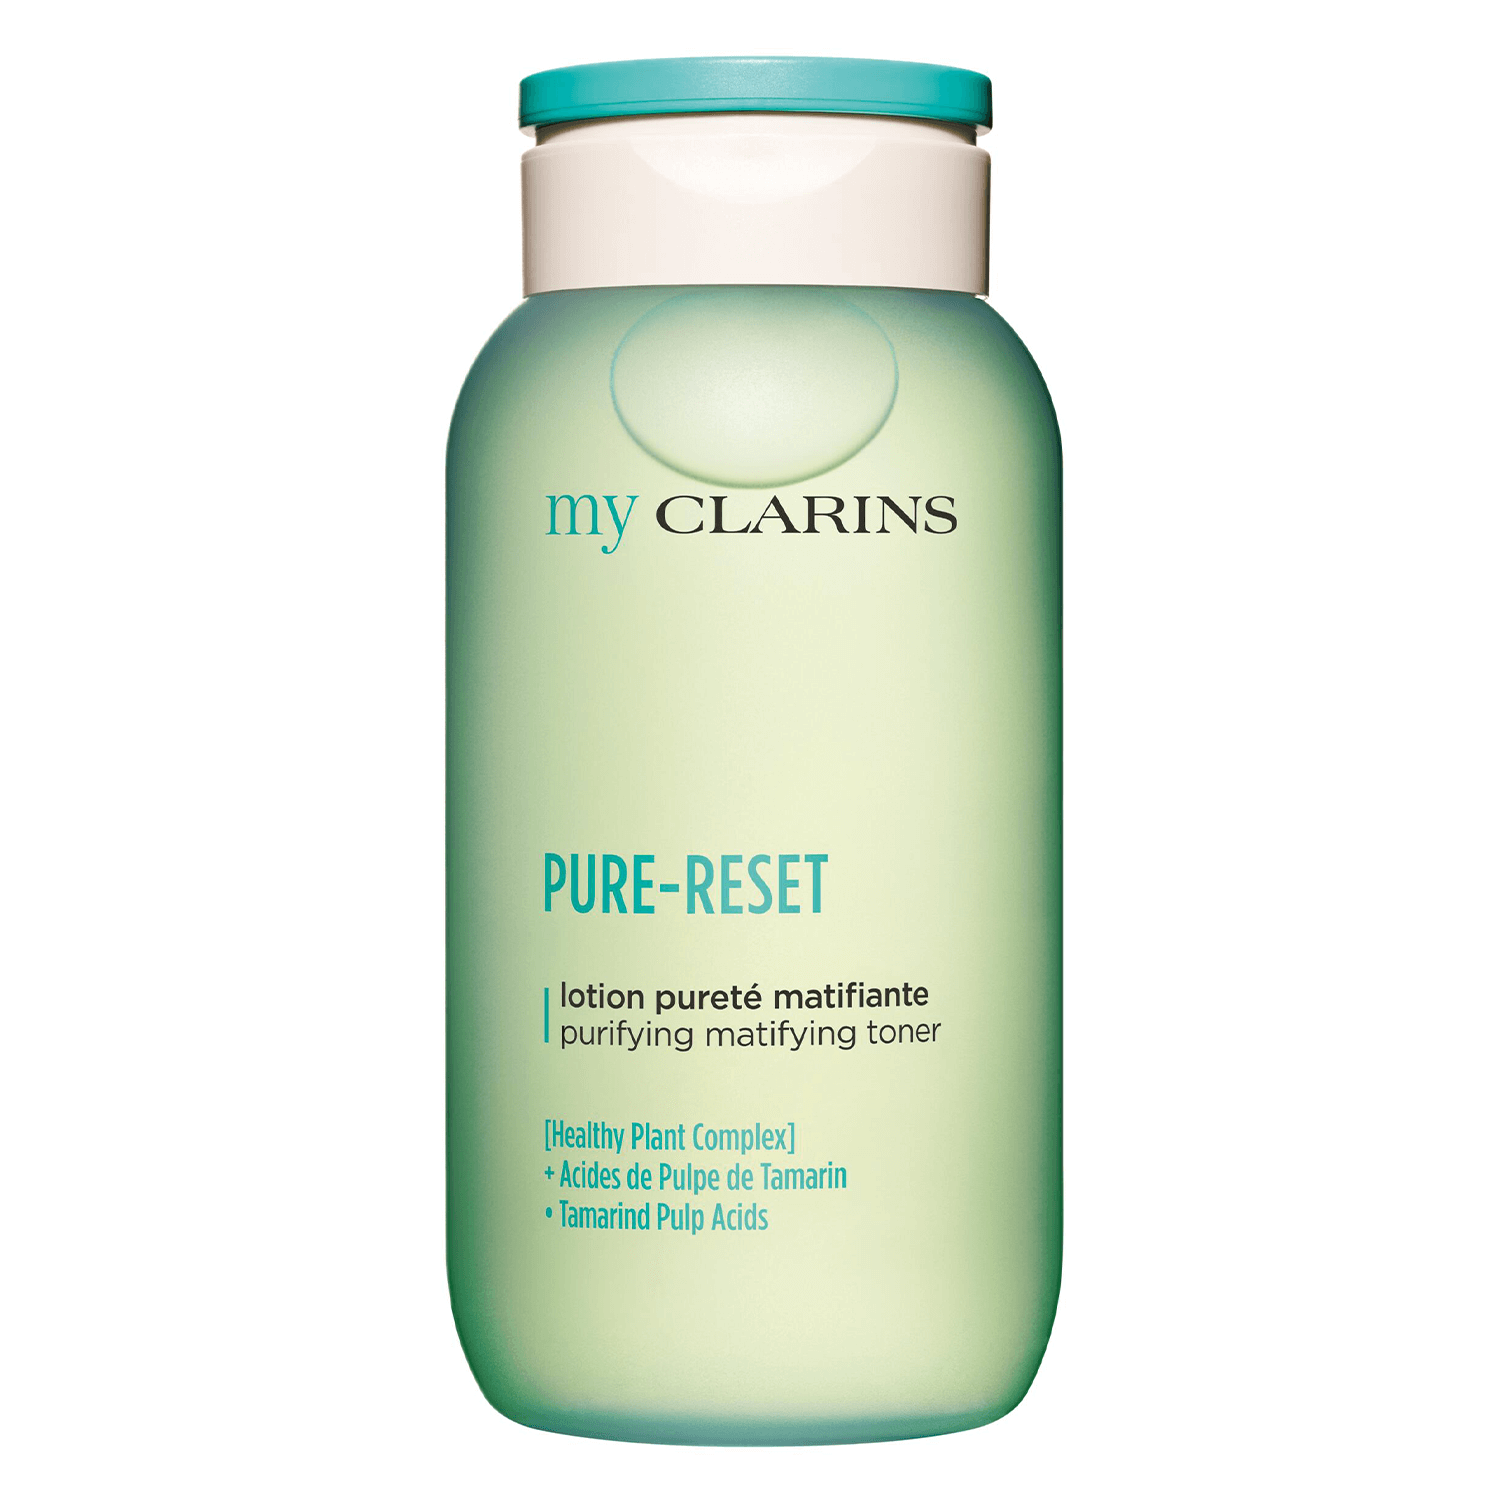 Product image from myClarins - PURE-RESET purifying matifying toner